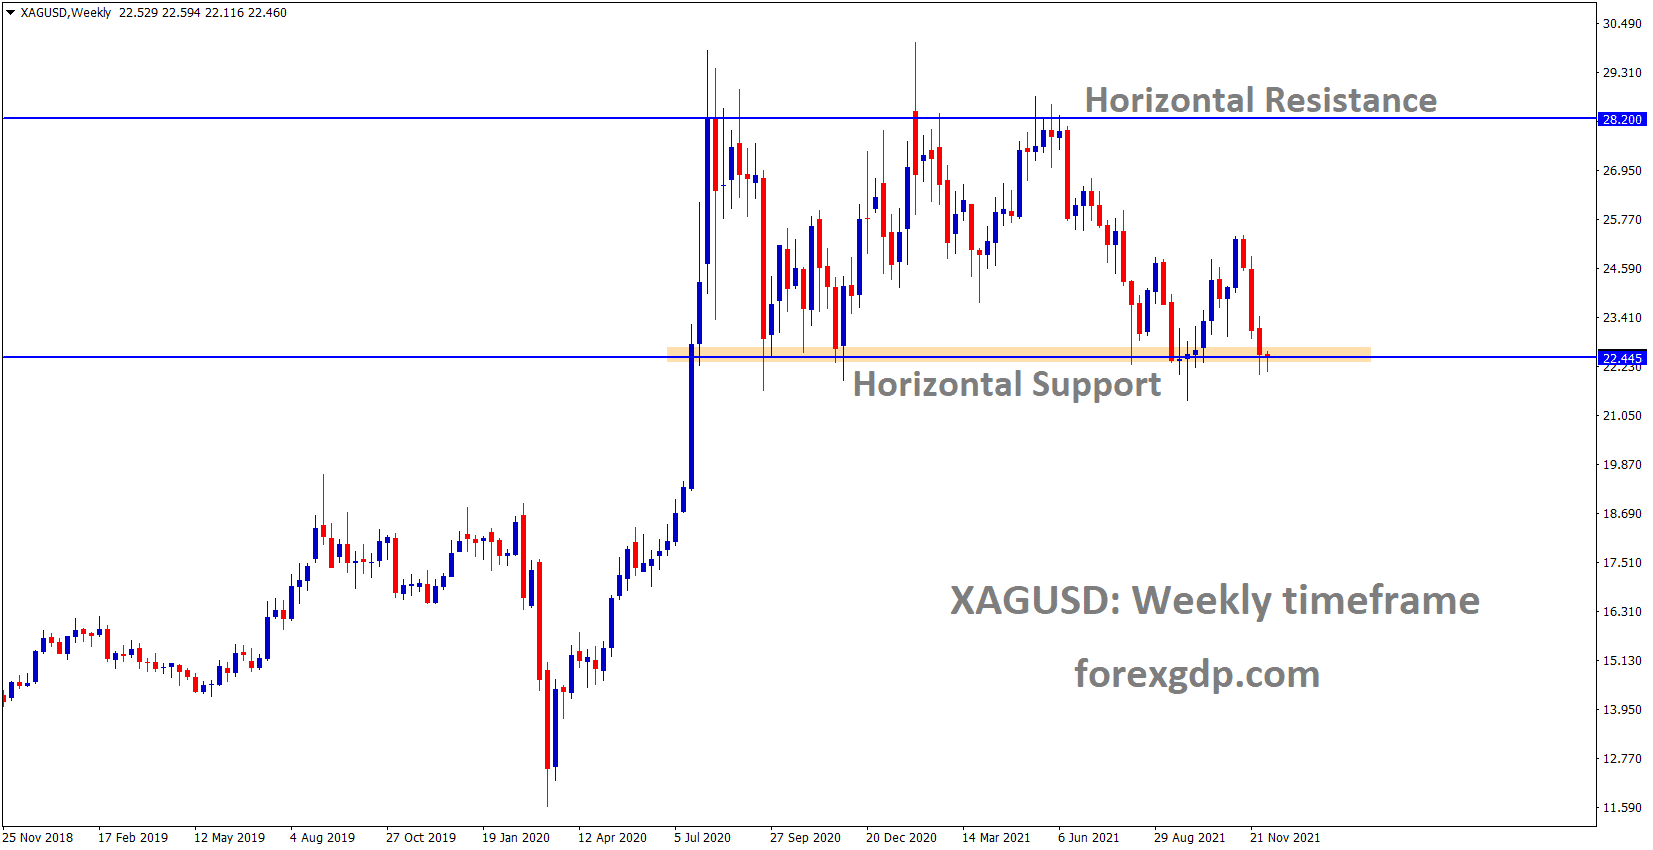 XAGUSD Silver price has reached the horizontal support area of the Box Pattern